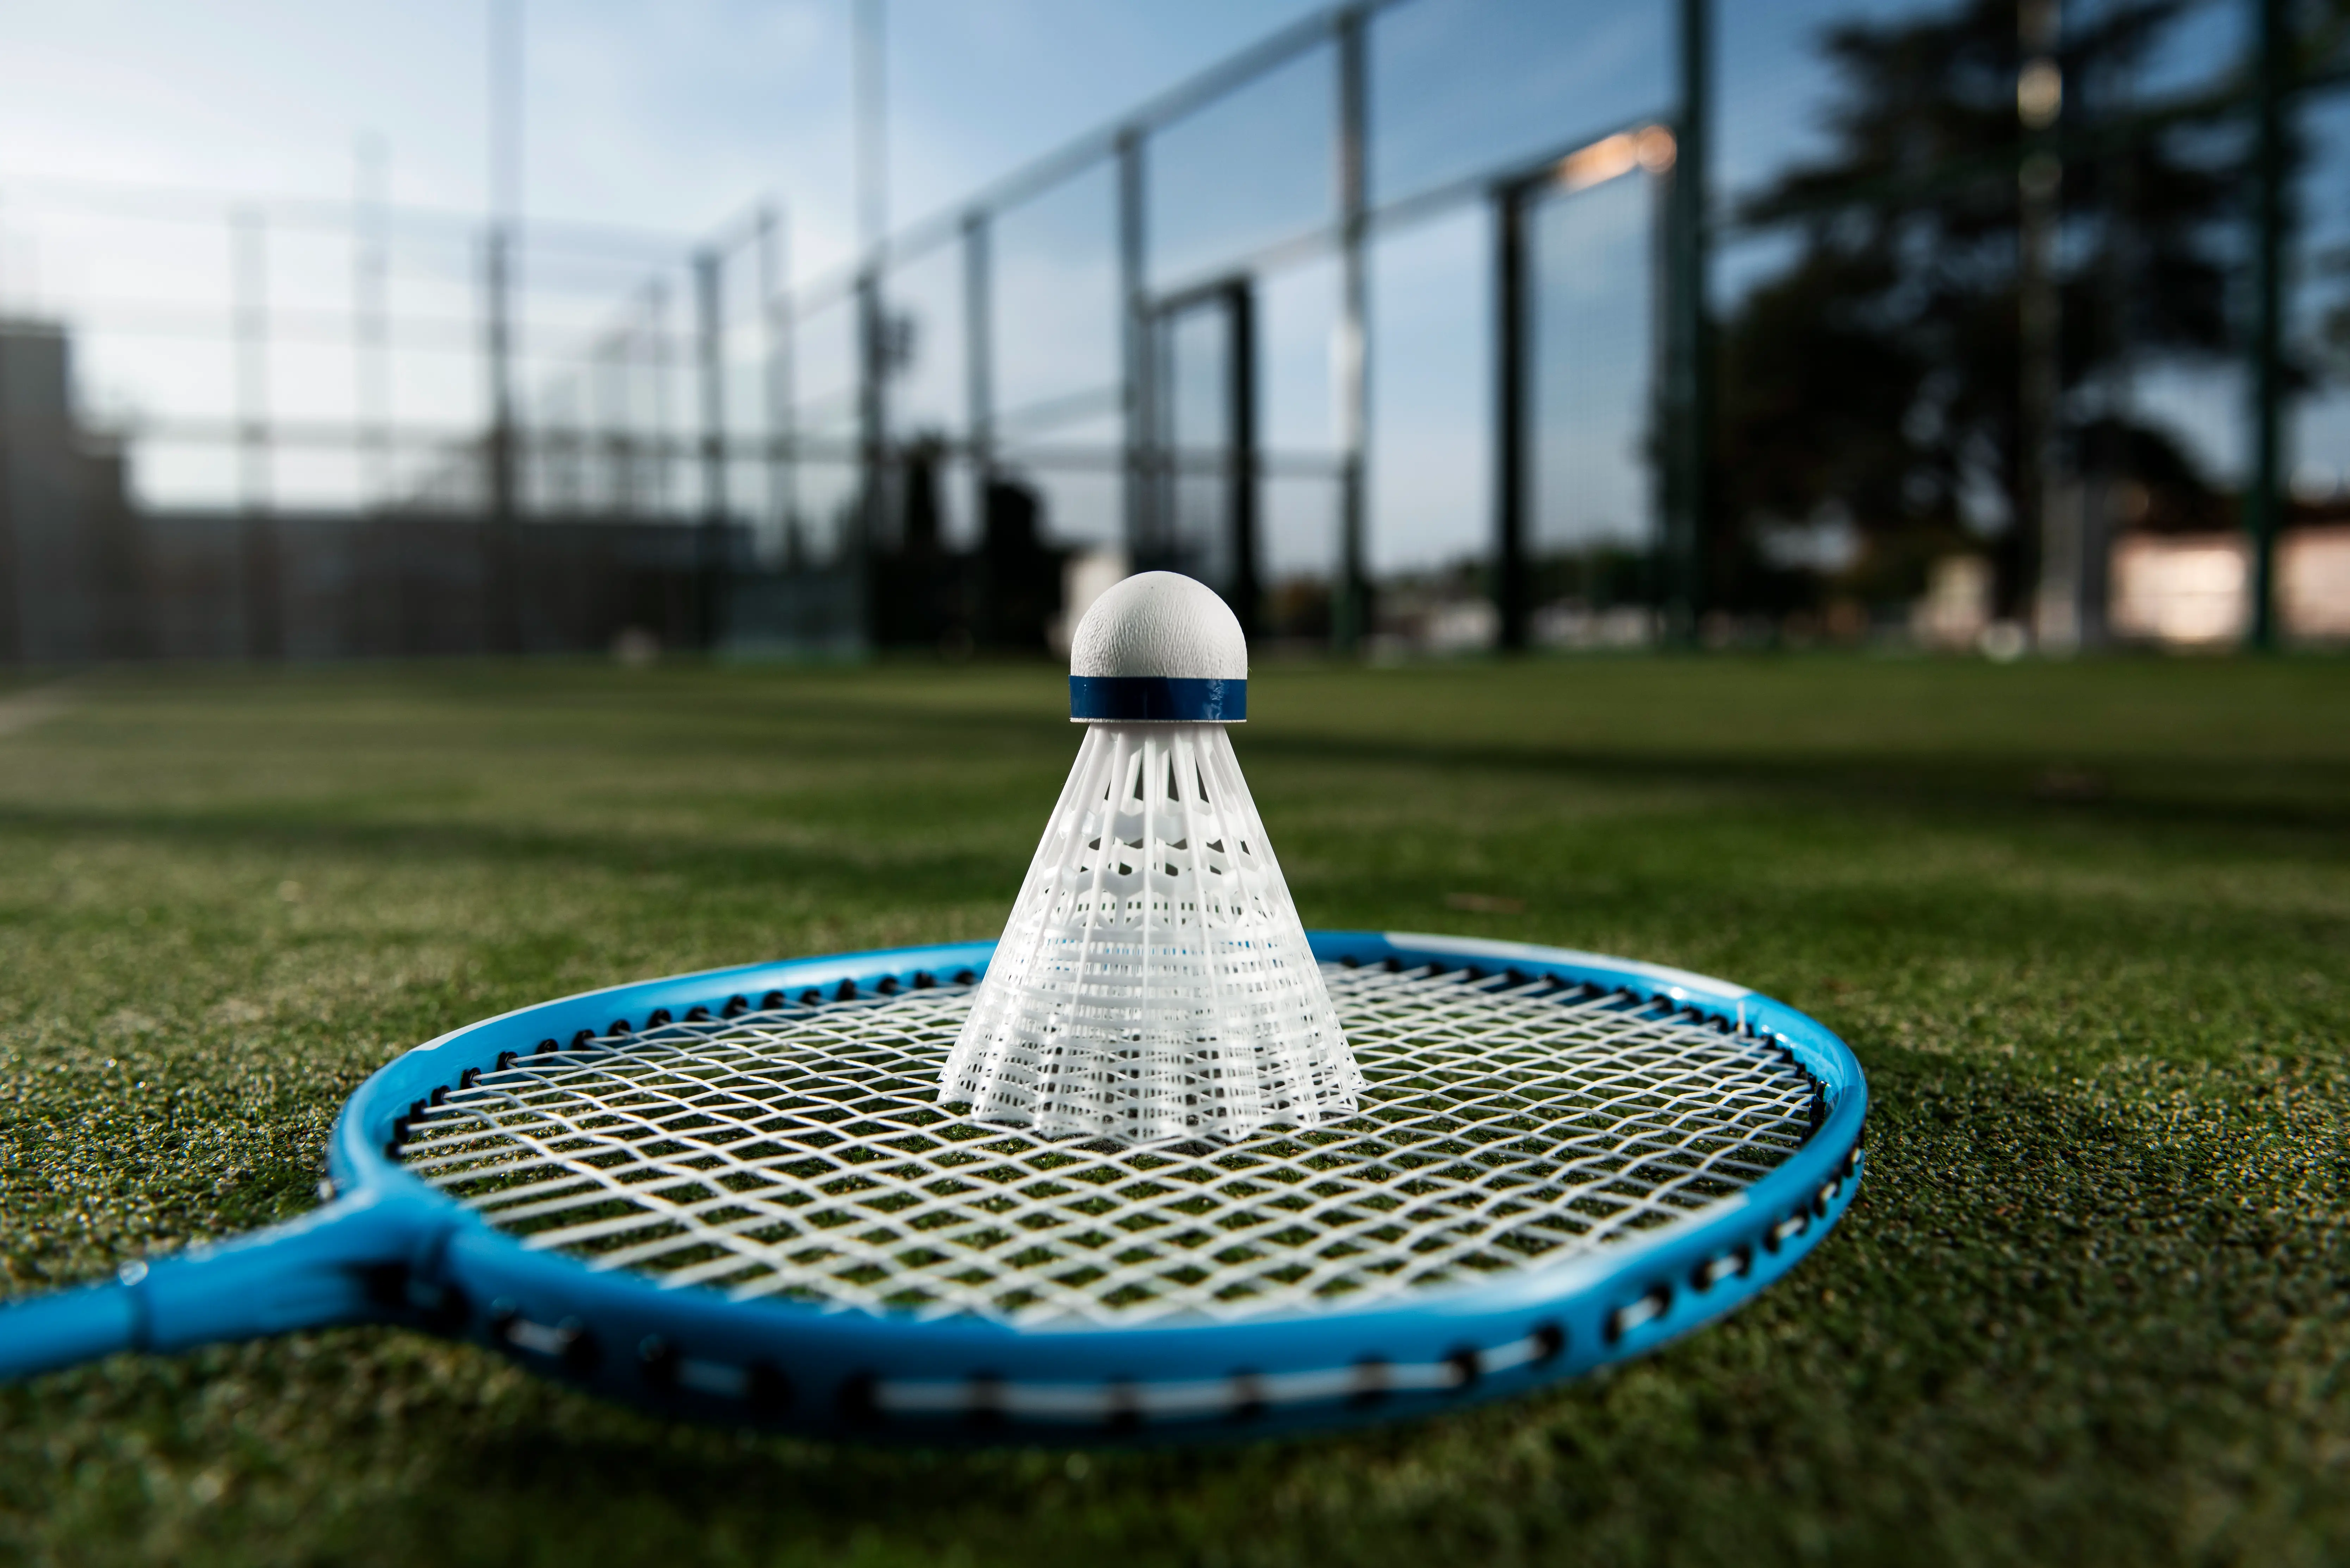 engagesports provide best Badminton court in Dubai: Find the best places to play badminton in Dubai with our comprehensive guide, featuring court locations and facility amenities.